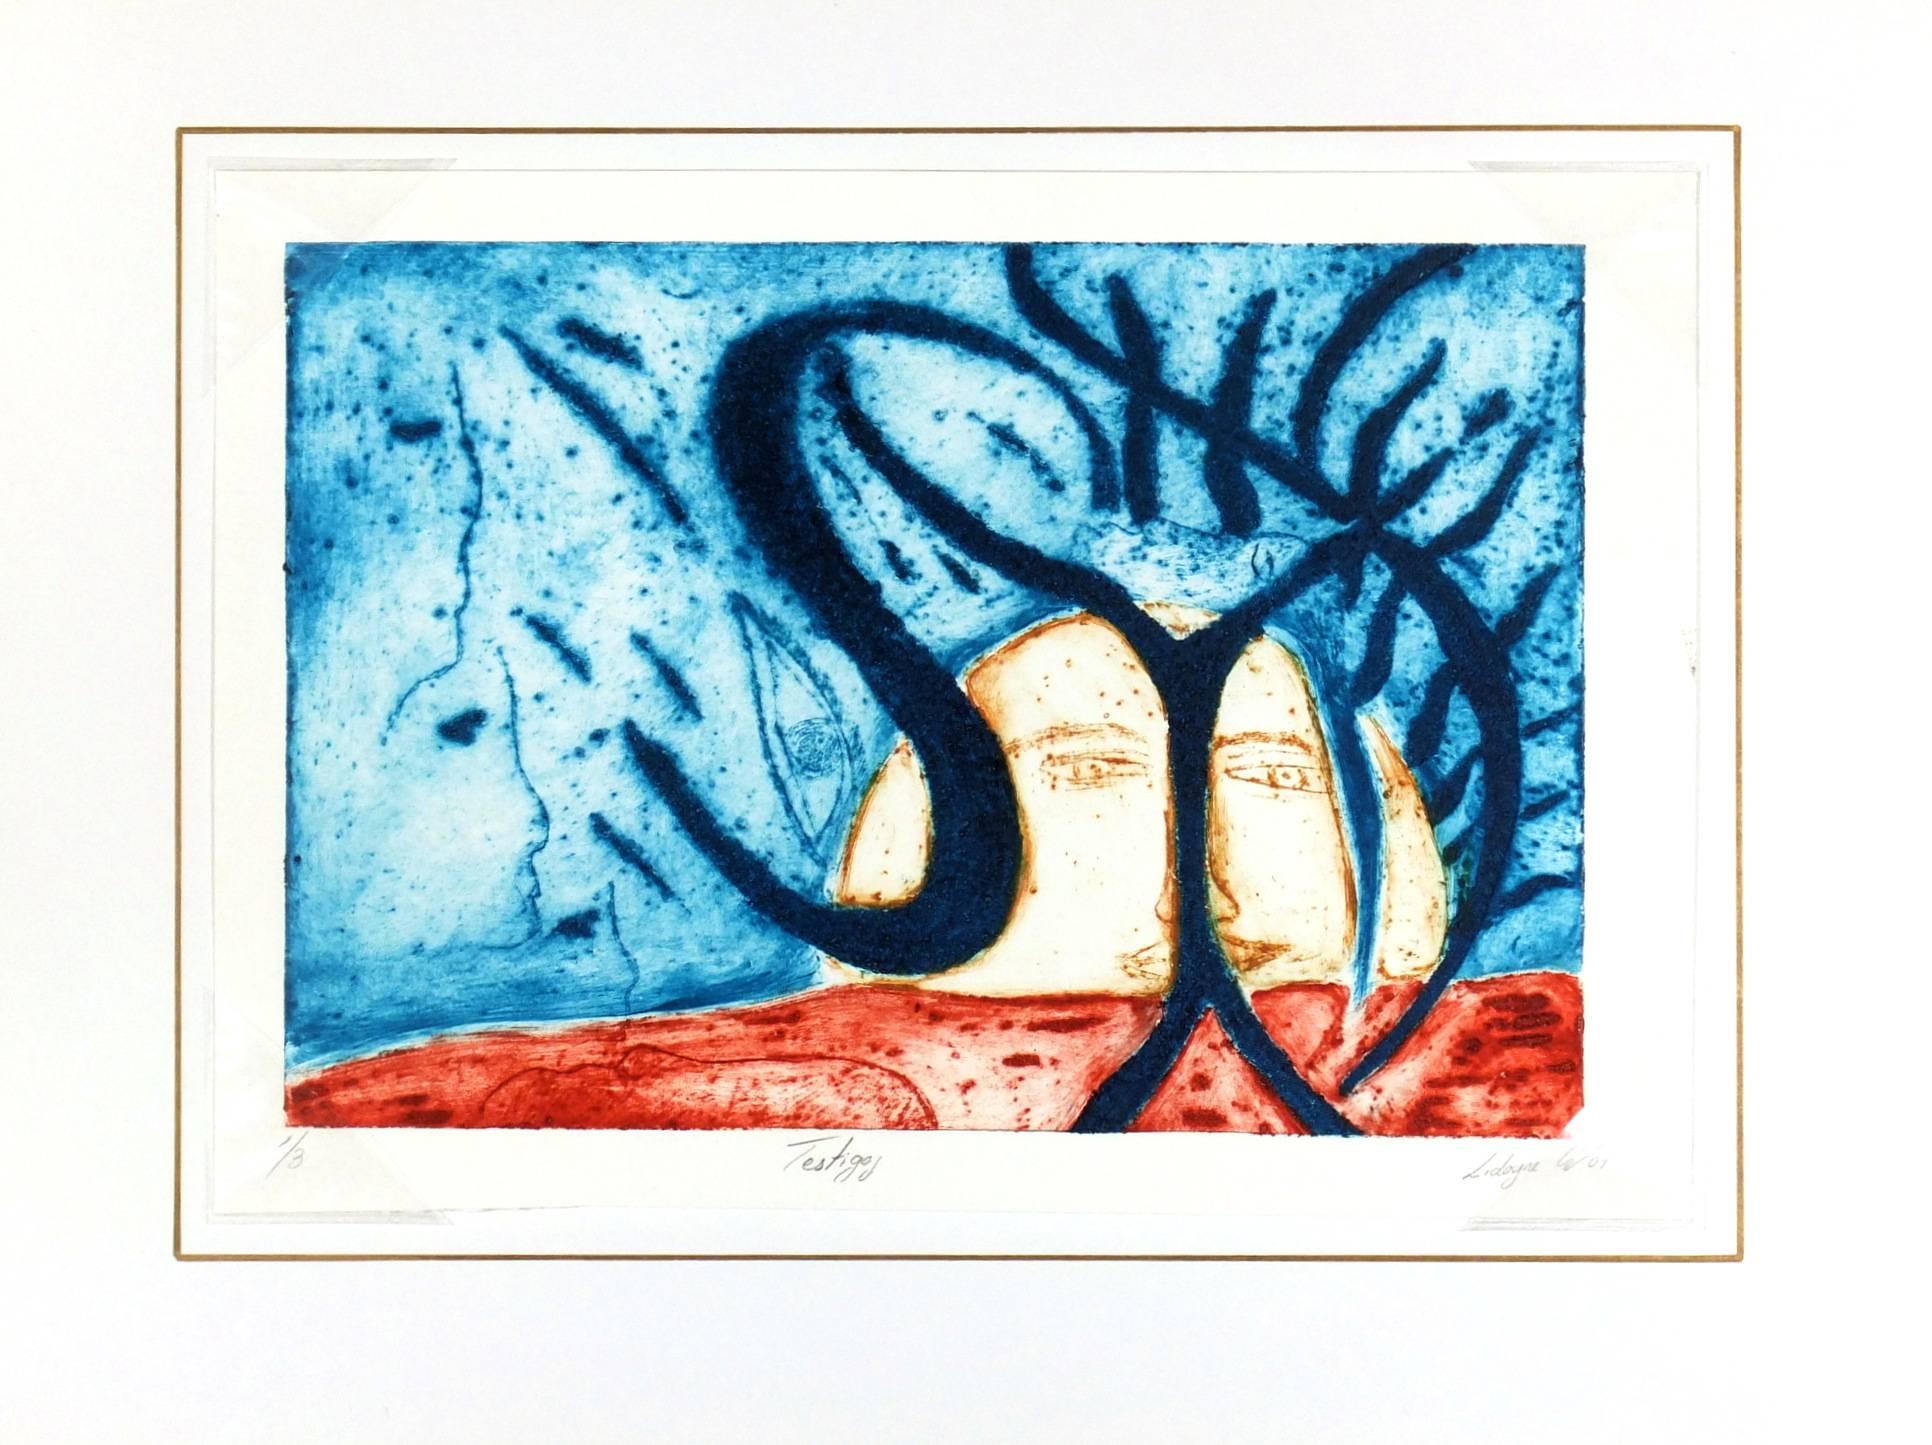 Abstract Aquatint Etching - Testigos - Blue Abstract Print by Unknown